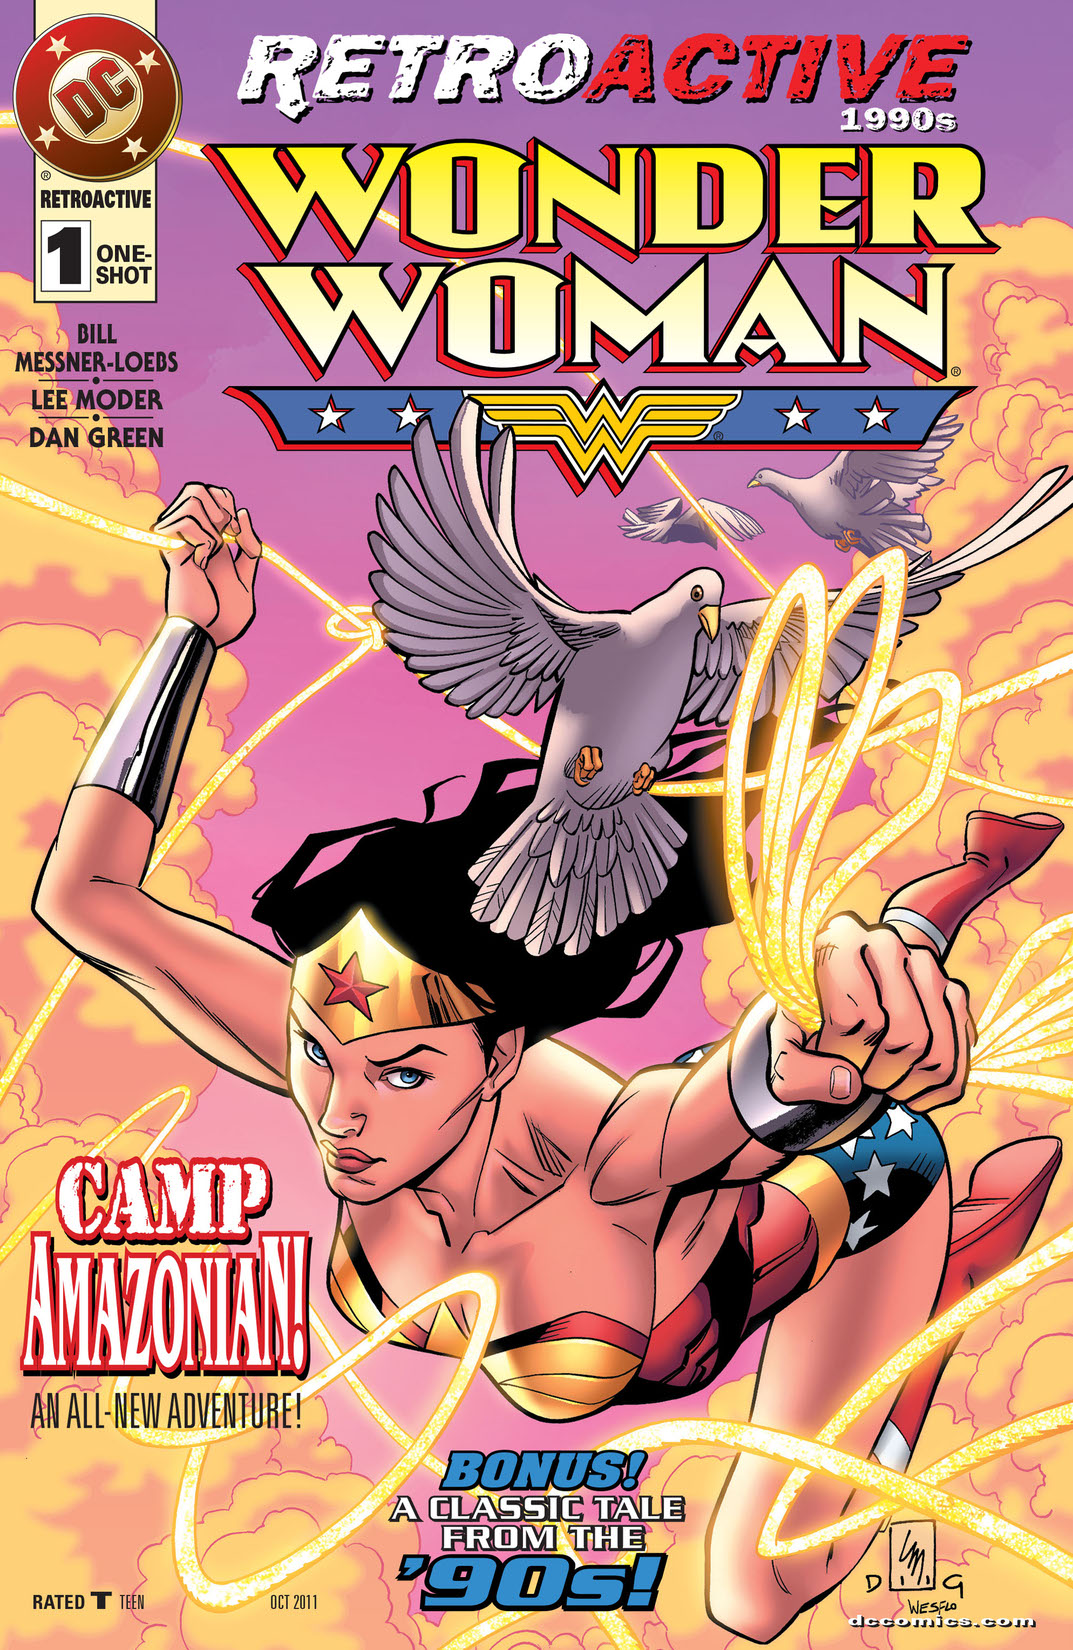 DC Retroactive: Wonder Woman - The '90s #1 preview images